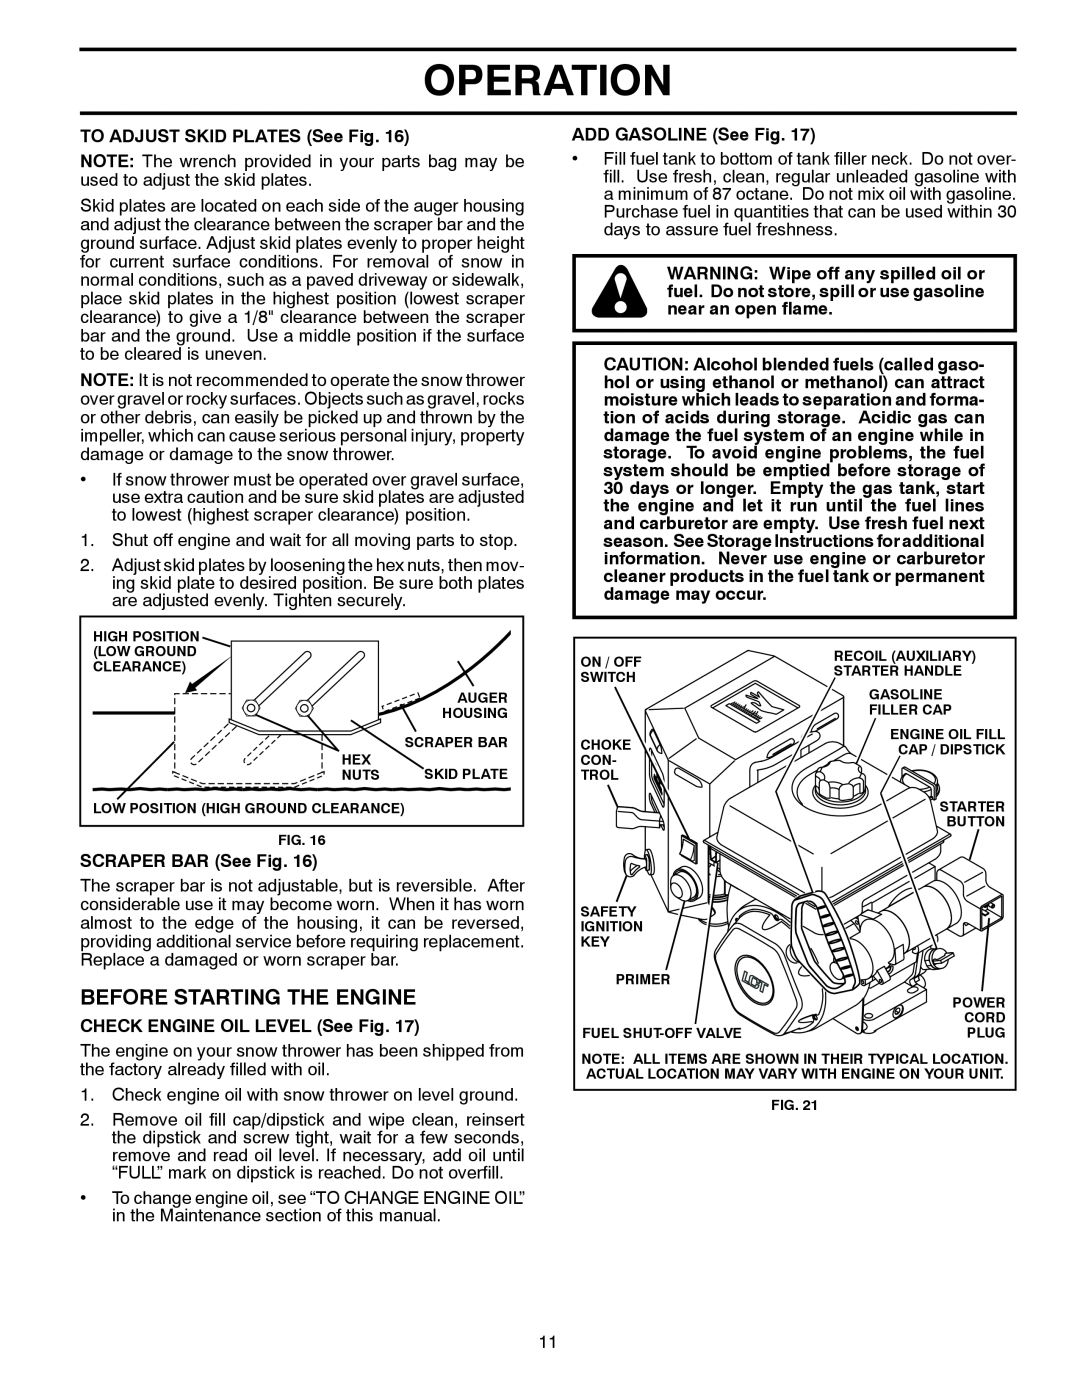 McCulloch 96192004102 Before Starting The Engine, Operation, TO ADJUST SKID PLATES See Fig, SCRAPER BAR See Fig 